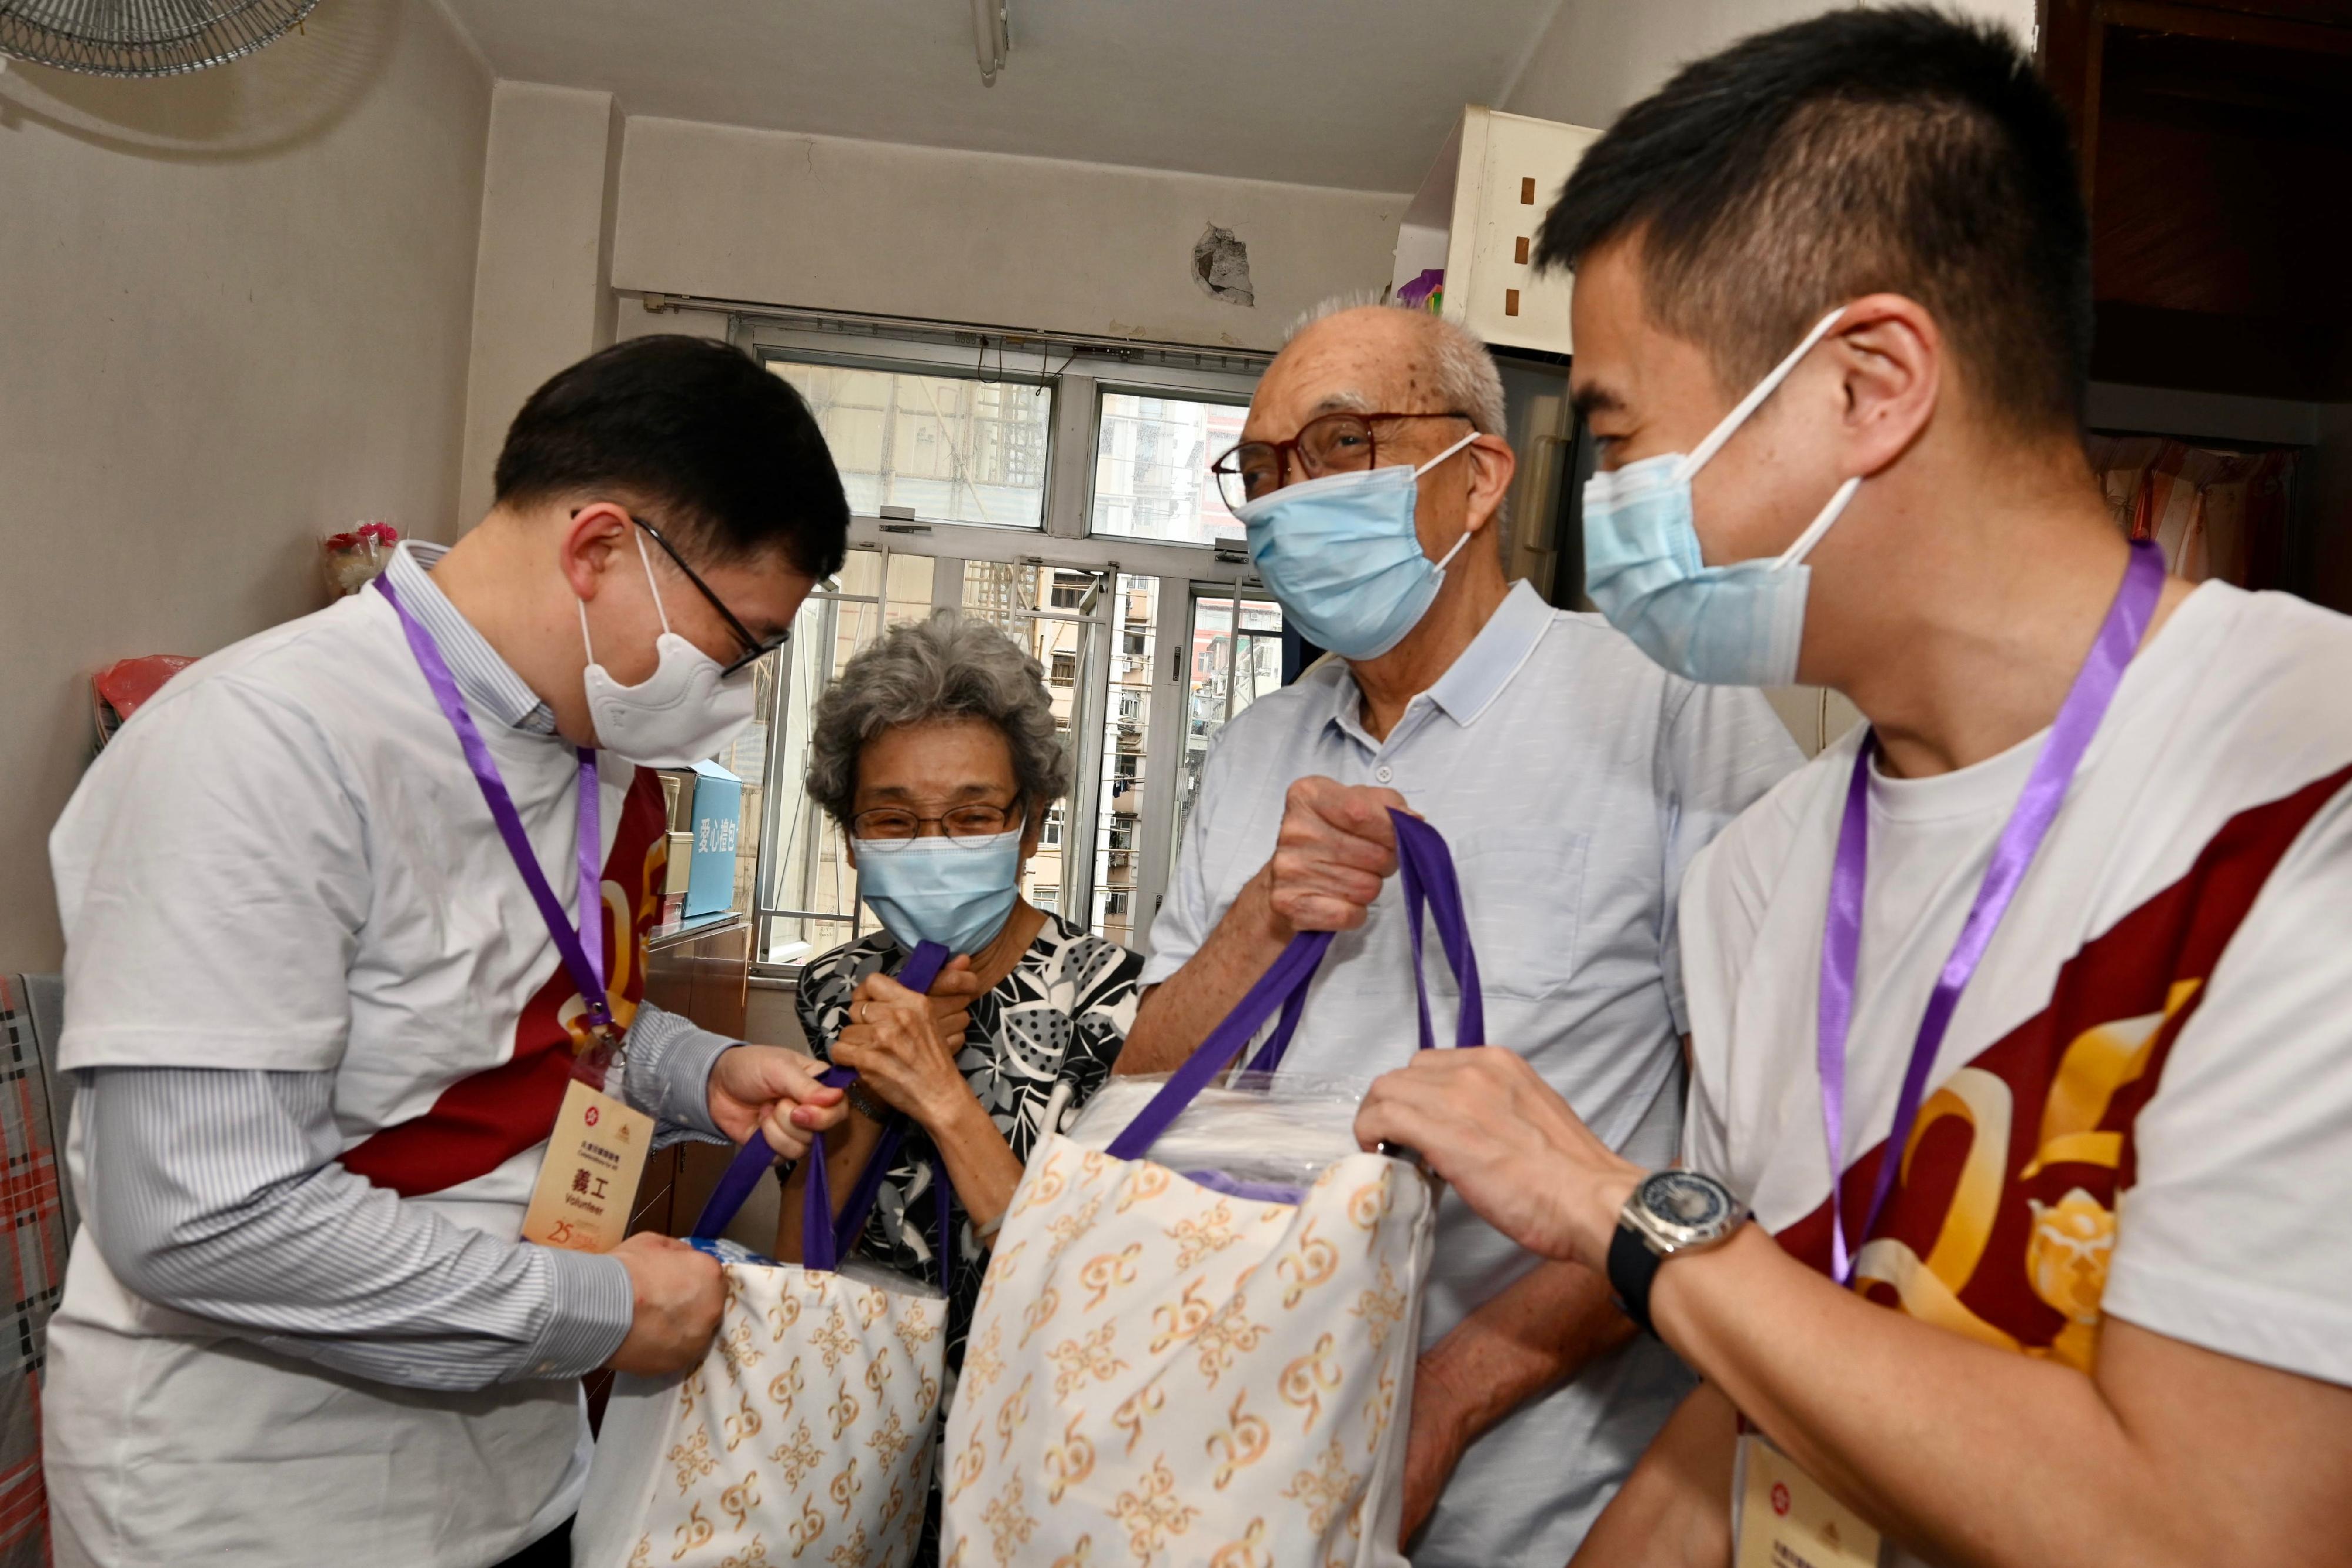 The Under Secretary for Constitutional and Mainland Affairs, Mr Clement Woo, paid home visits under the Celebrations for All project in Yau Tsim Mong District today (June 21). Photo shows Mr Woo (first left), accompanied by the District Officer (Yau Tsim Mong), Mr Edward Yu (first right), visiting an elderly doubleton household and giving them gift packs in celebration of the 25th anniversary of the establishment of the Hong Kong Special Administrative Region.